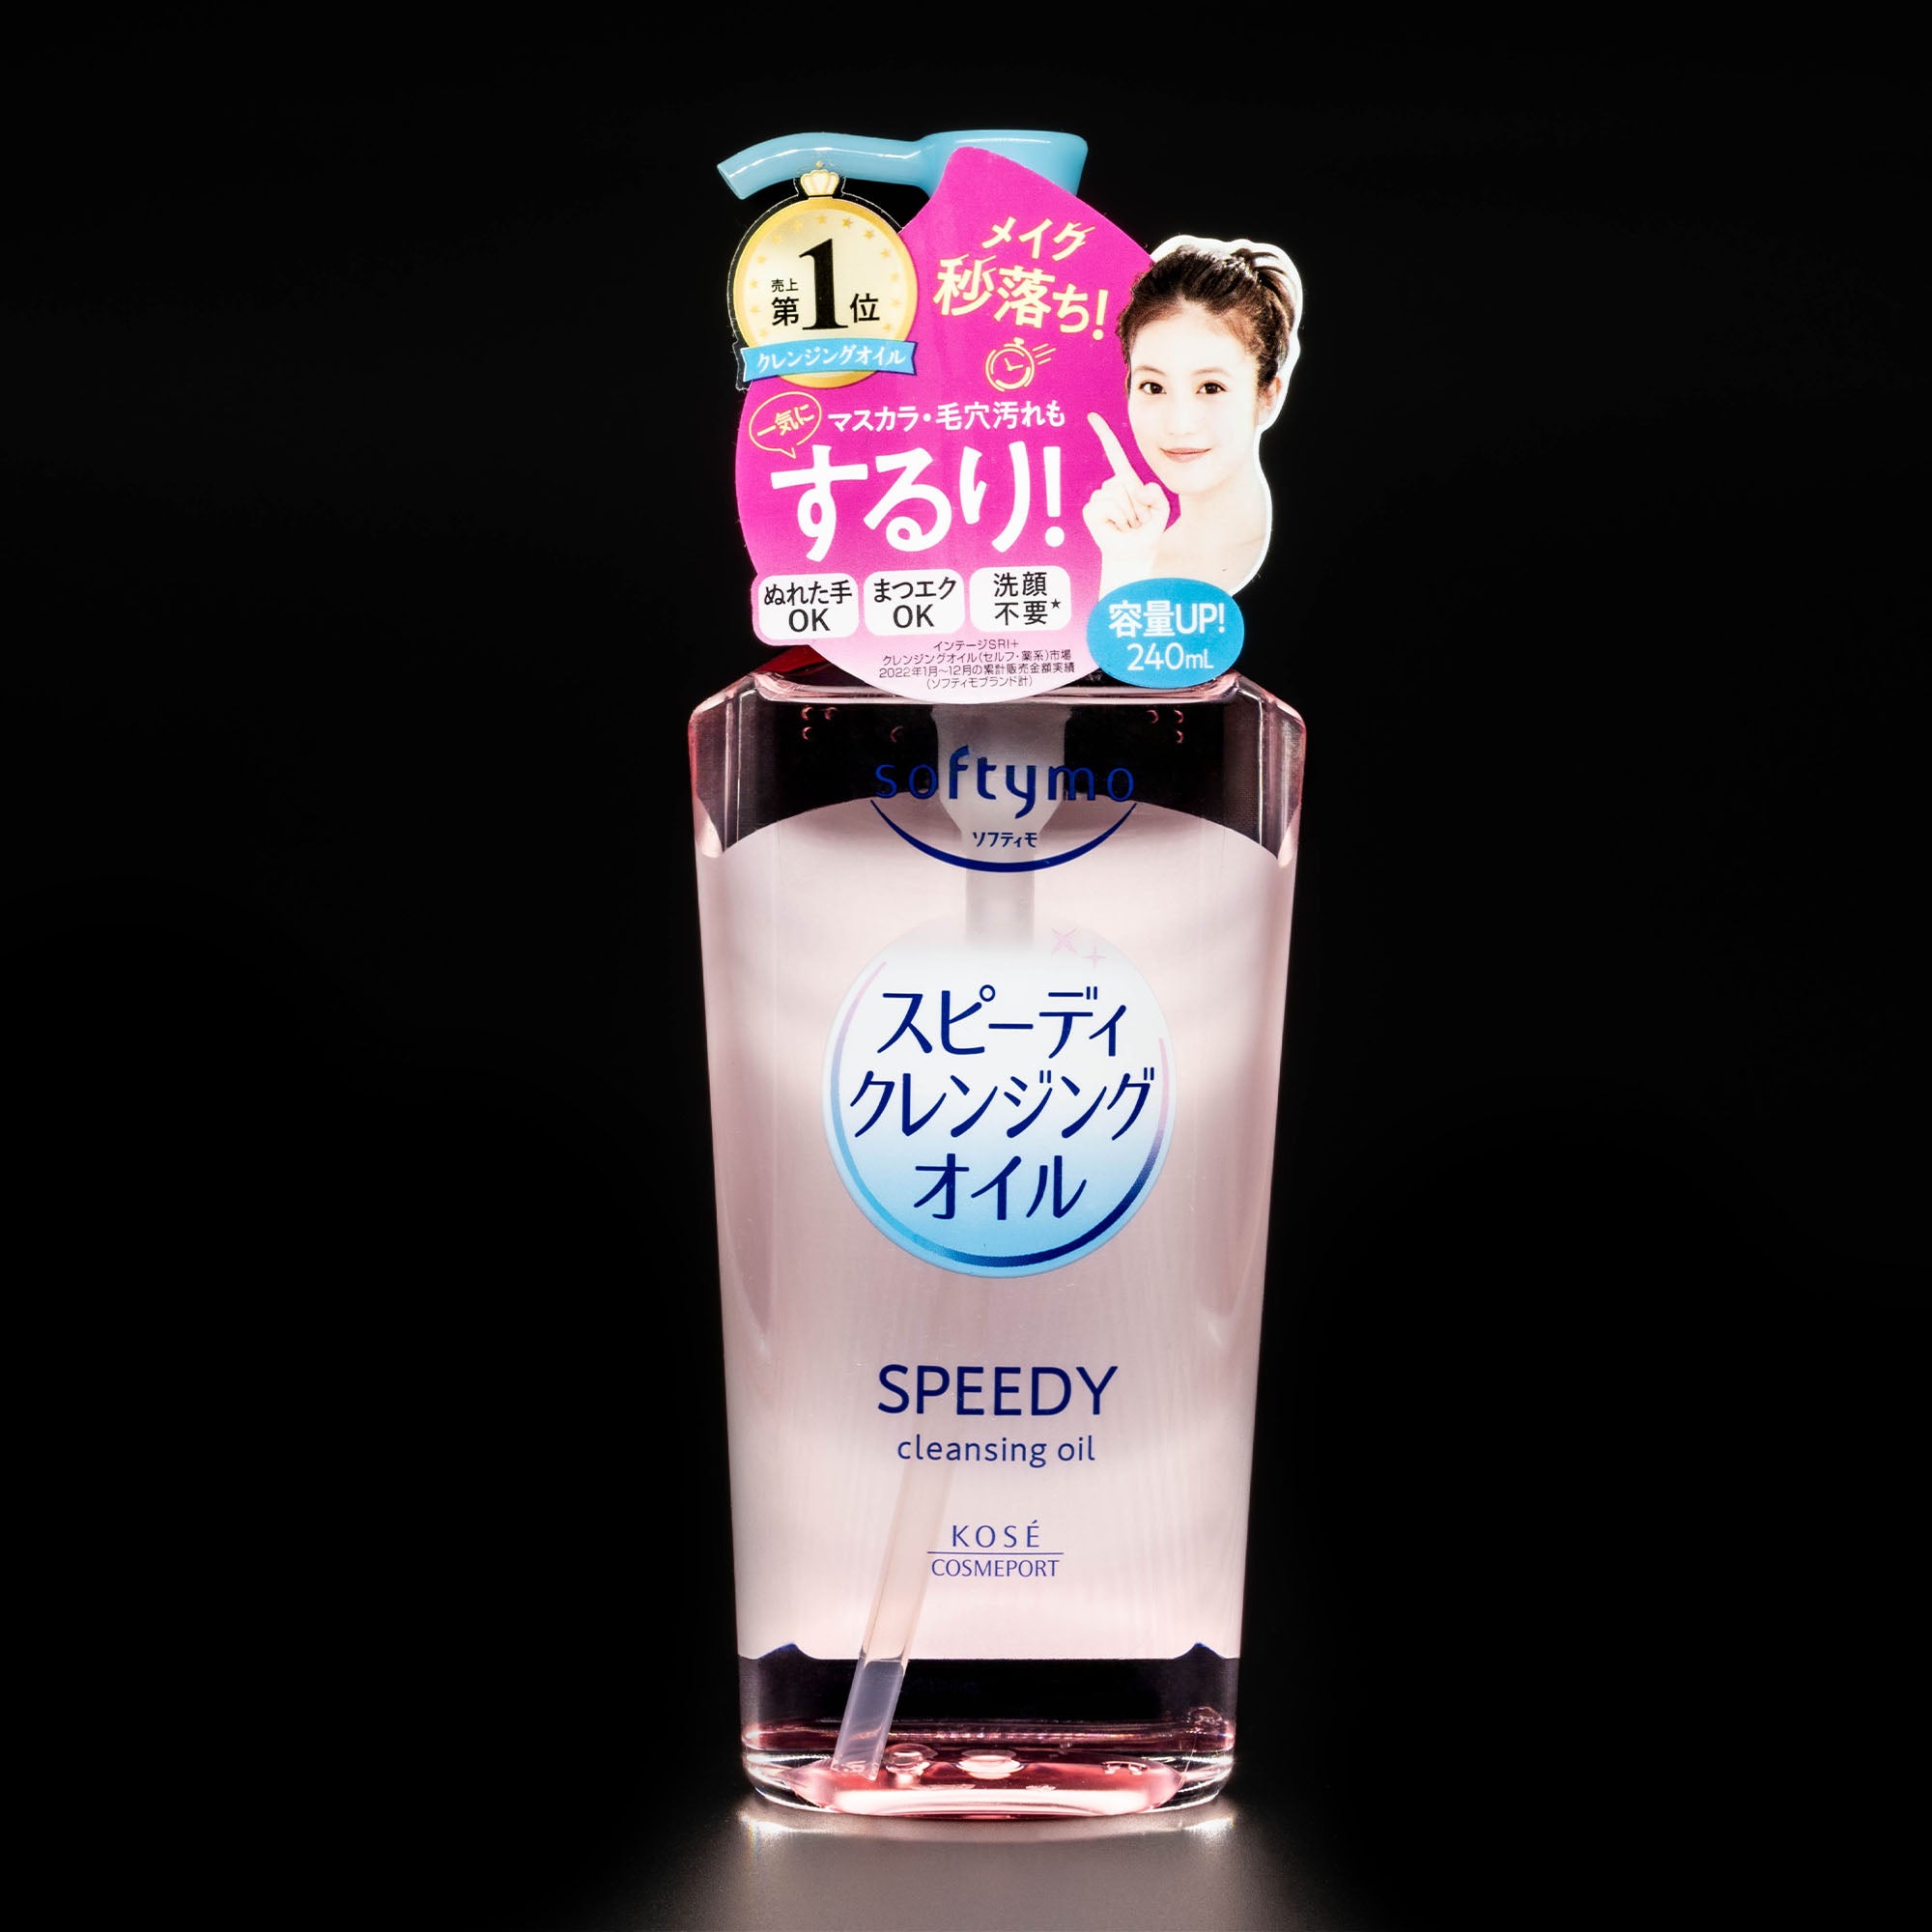 An Image of a Full size Softymo Speedy cleanser 240ml